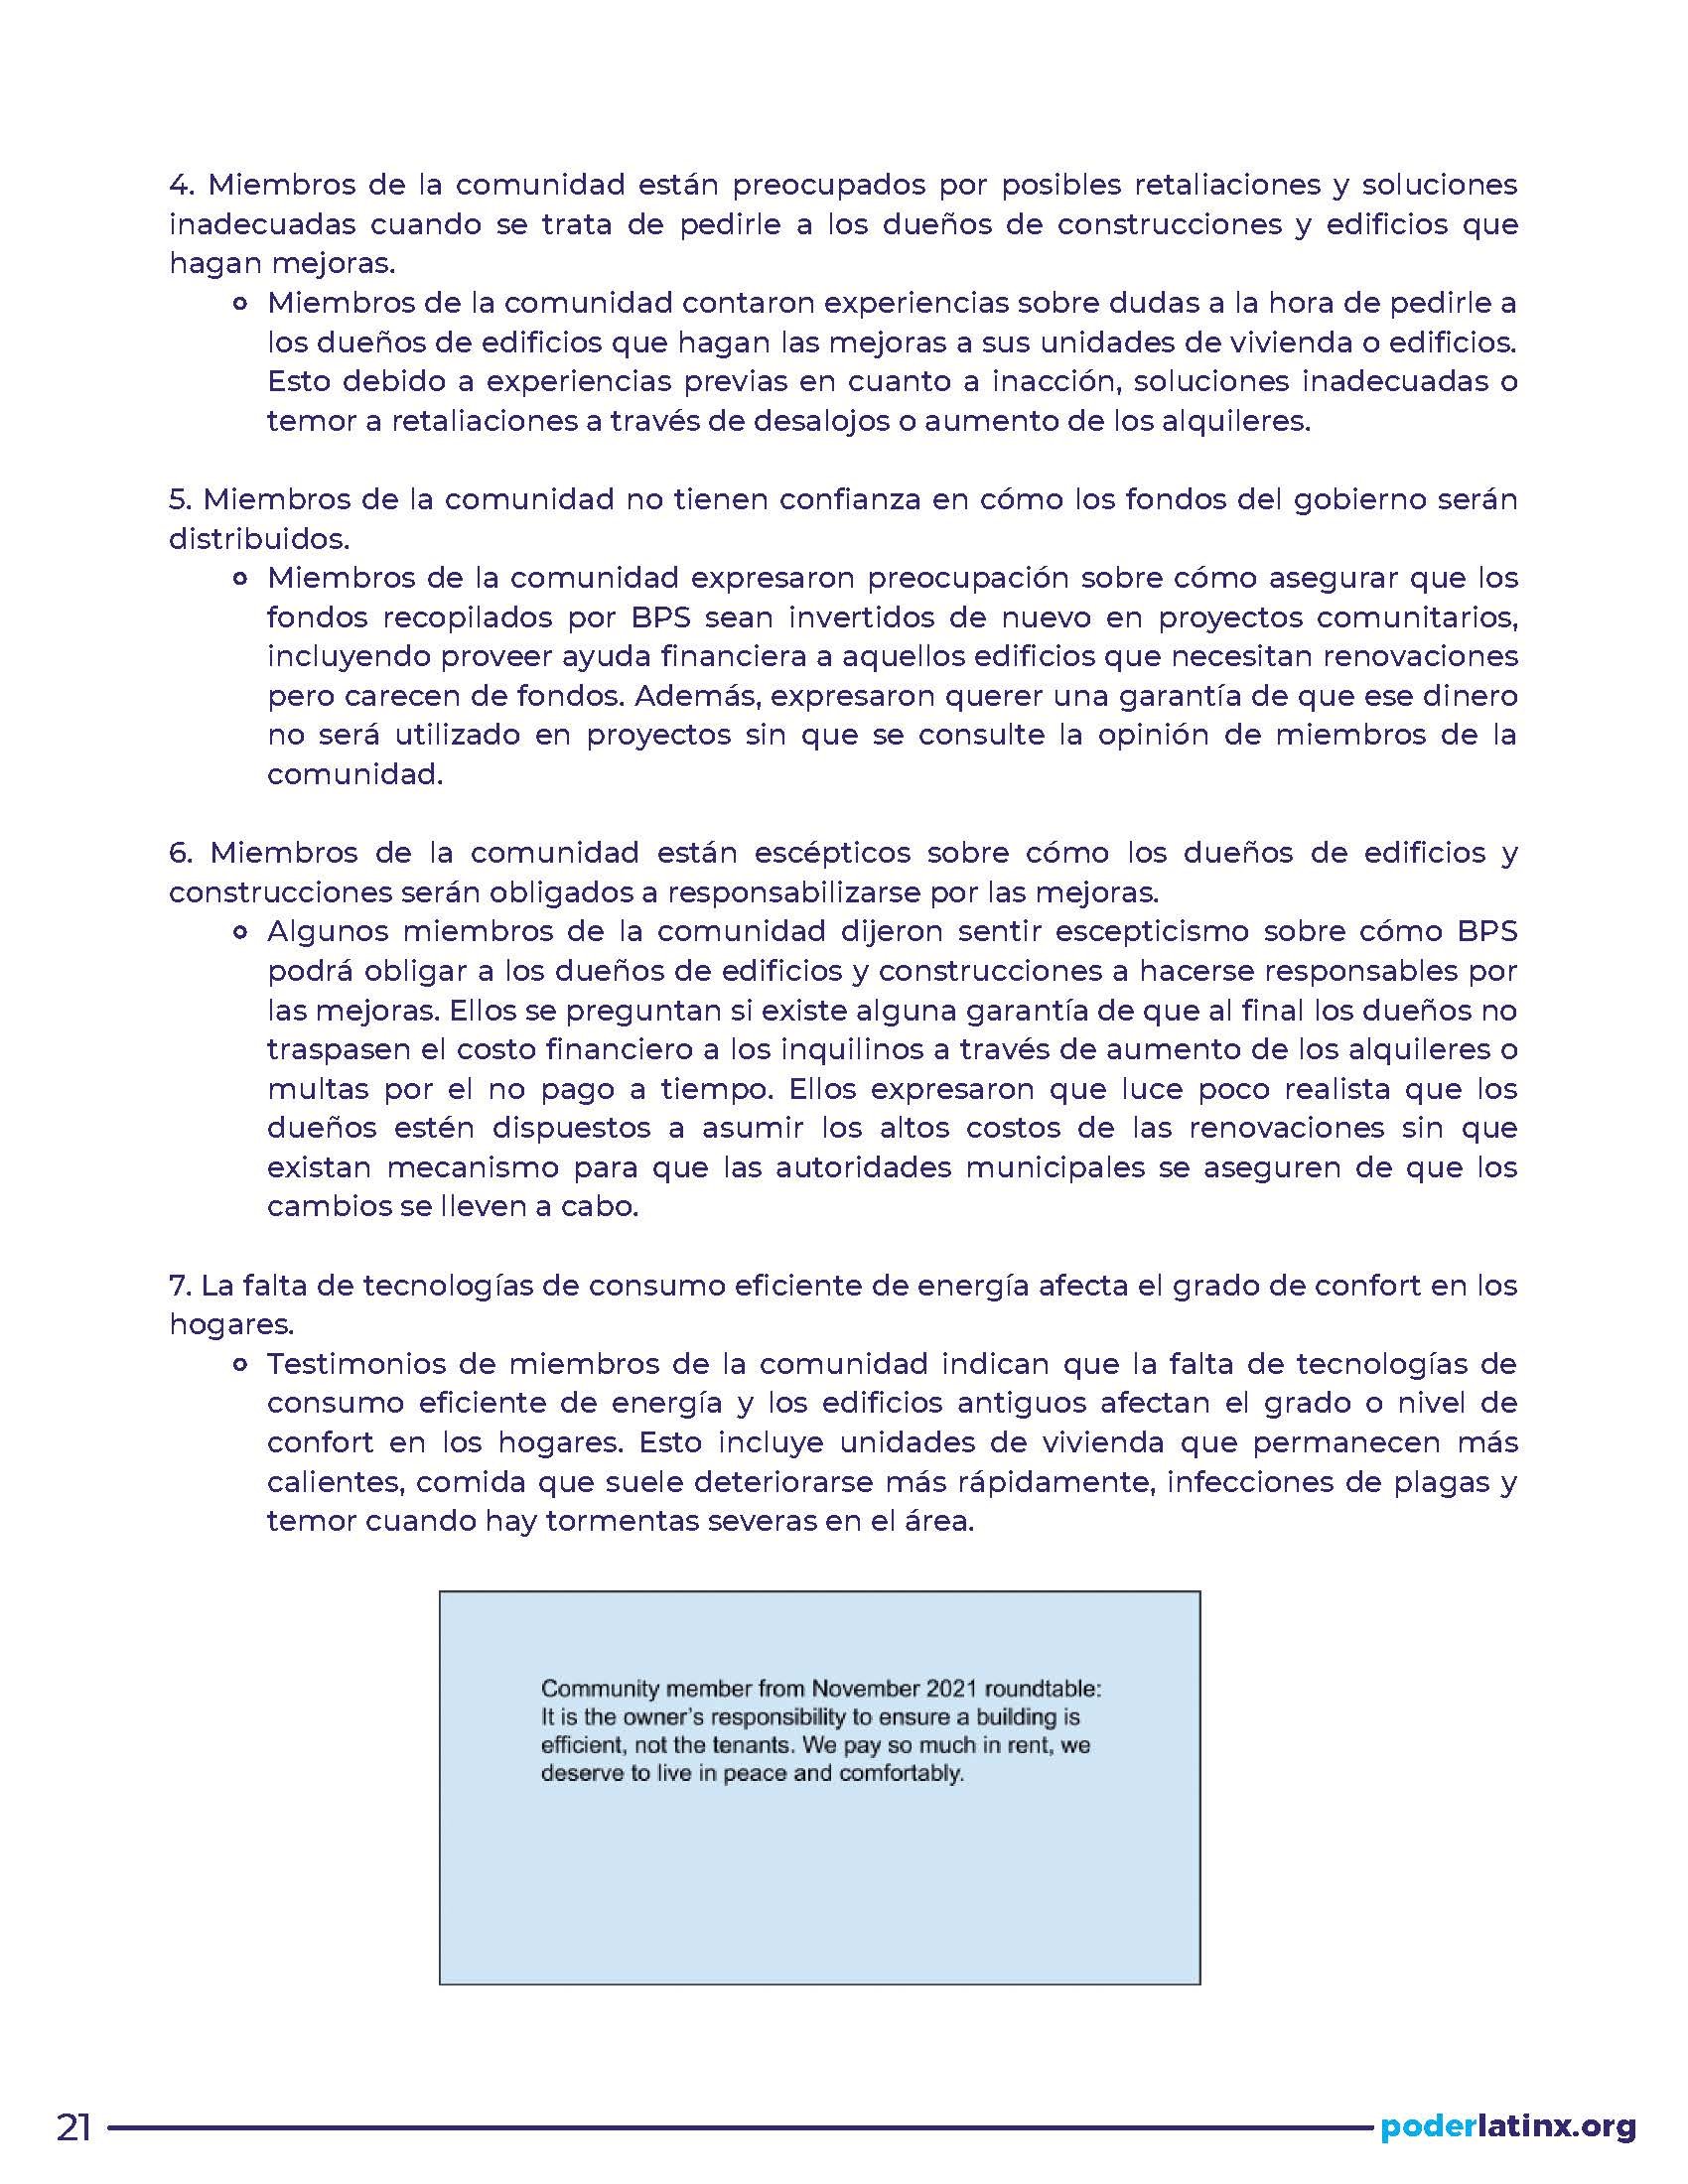 IMT Report - Spanish_Page_21.jpg